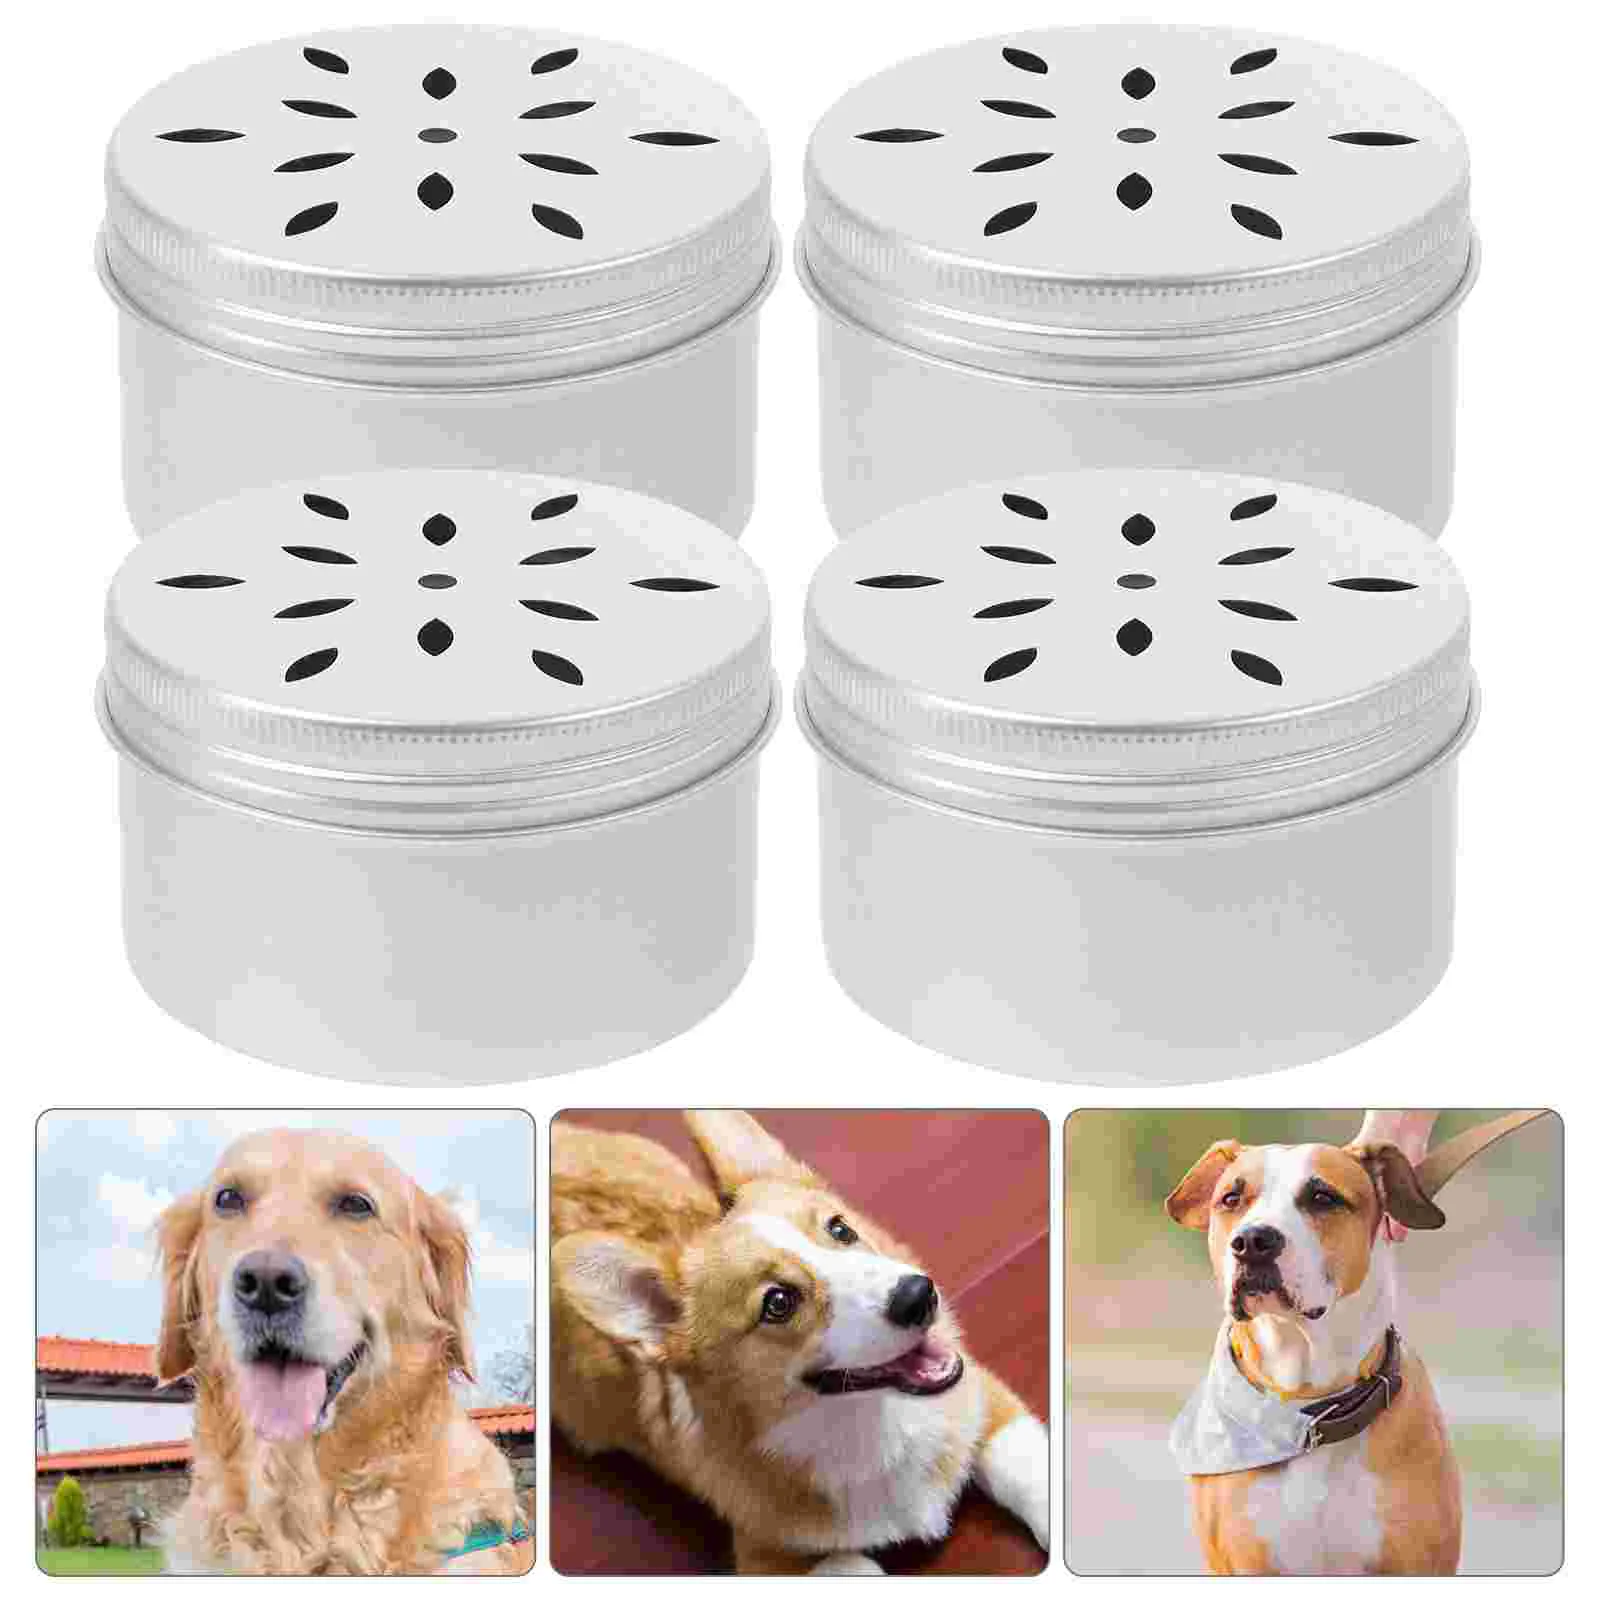 

10 Pcs Container Lid Dog Training Kit Odor Case Supplies Toy Nose Tool Aroma Holder Scent Work